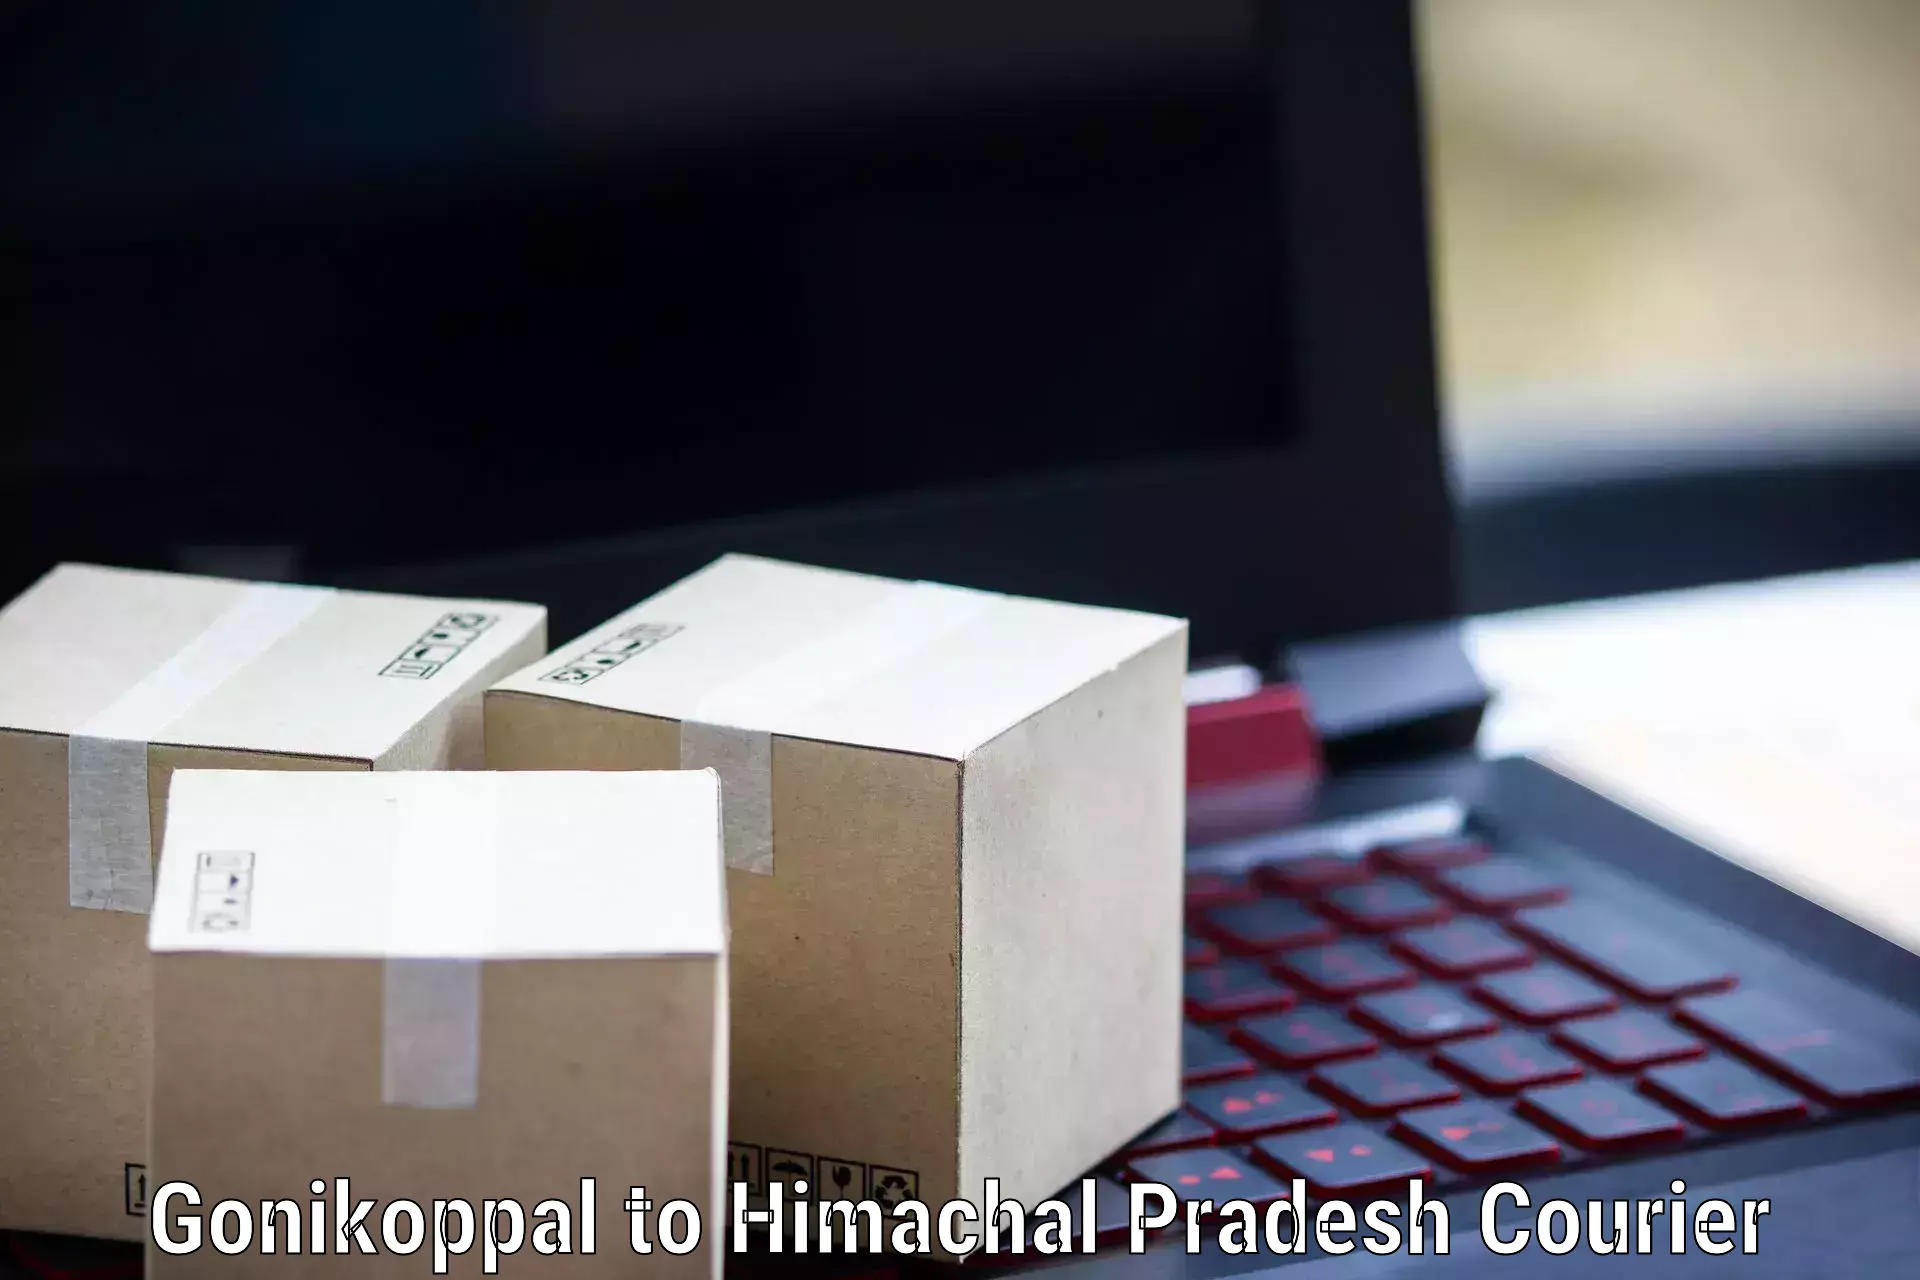 Express delivery network Gonikoppal to Himachal Pradesh